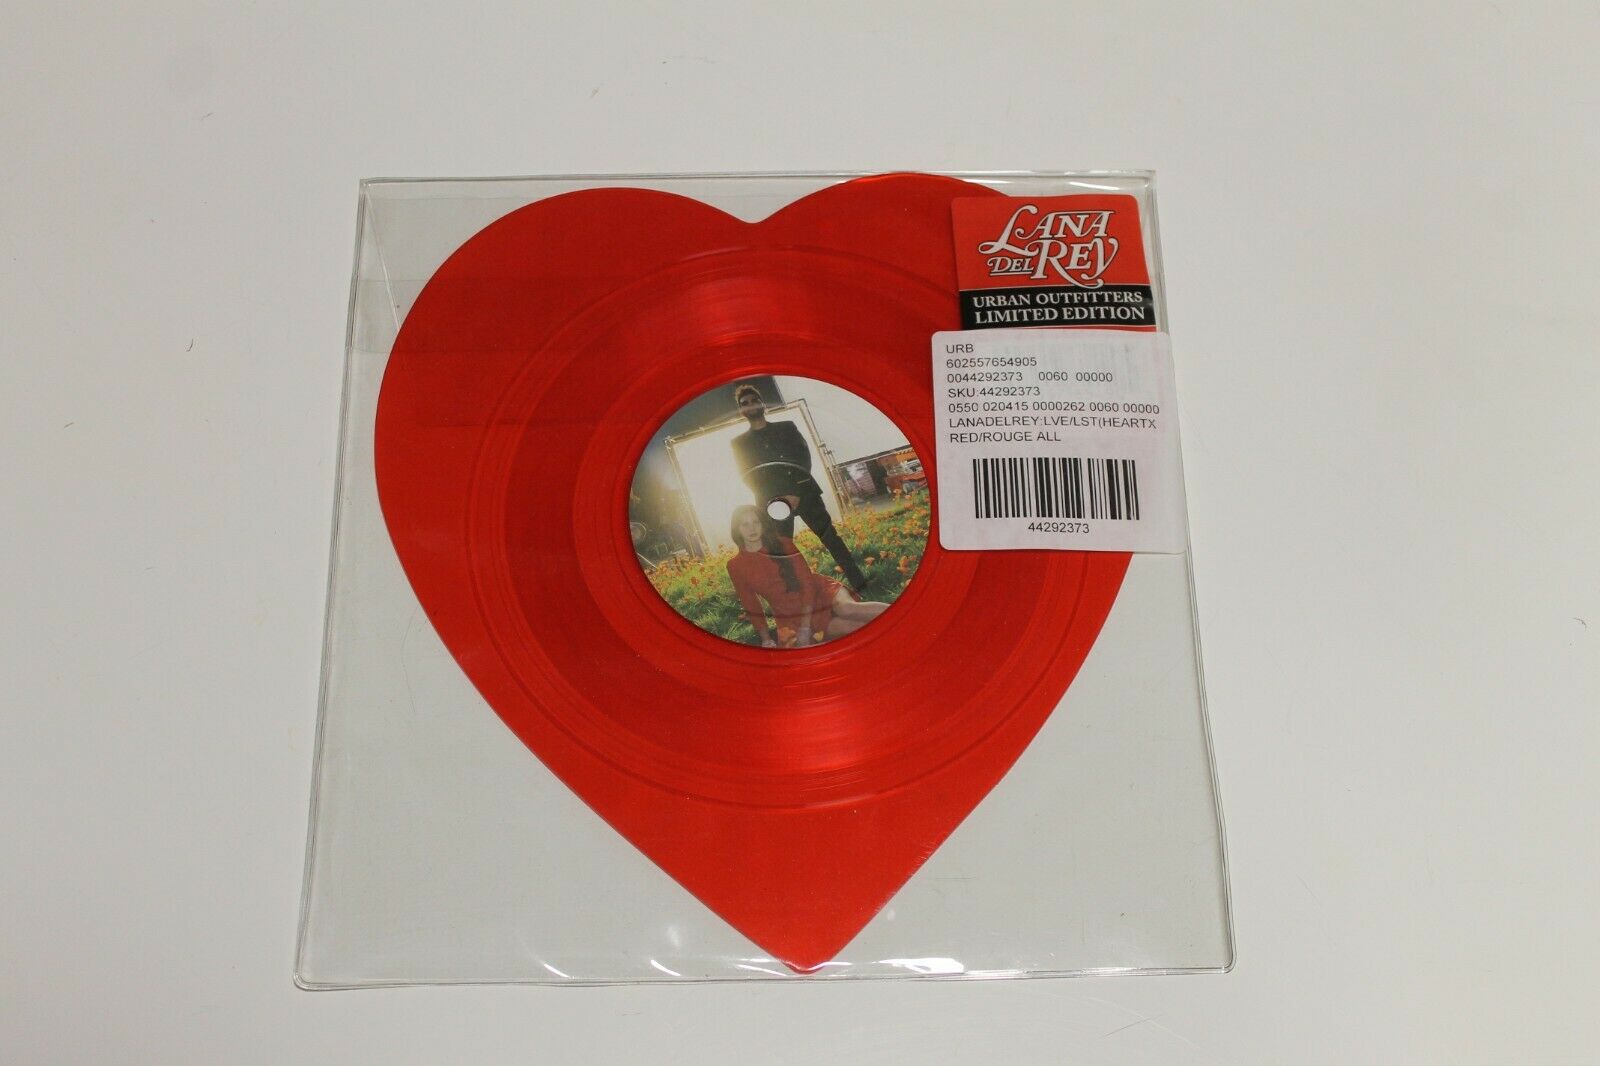 LANA DEL REY – LOVE/LUST FOR LIFE - URBAN OUTFITTERS LTD ED VINYL LP RED  NEW 602557654905